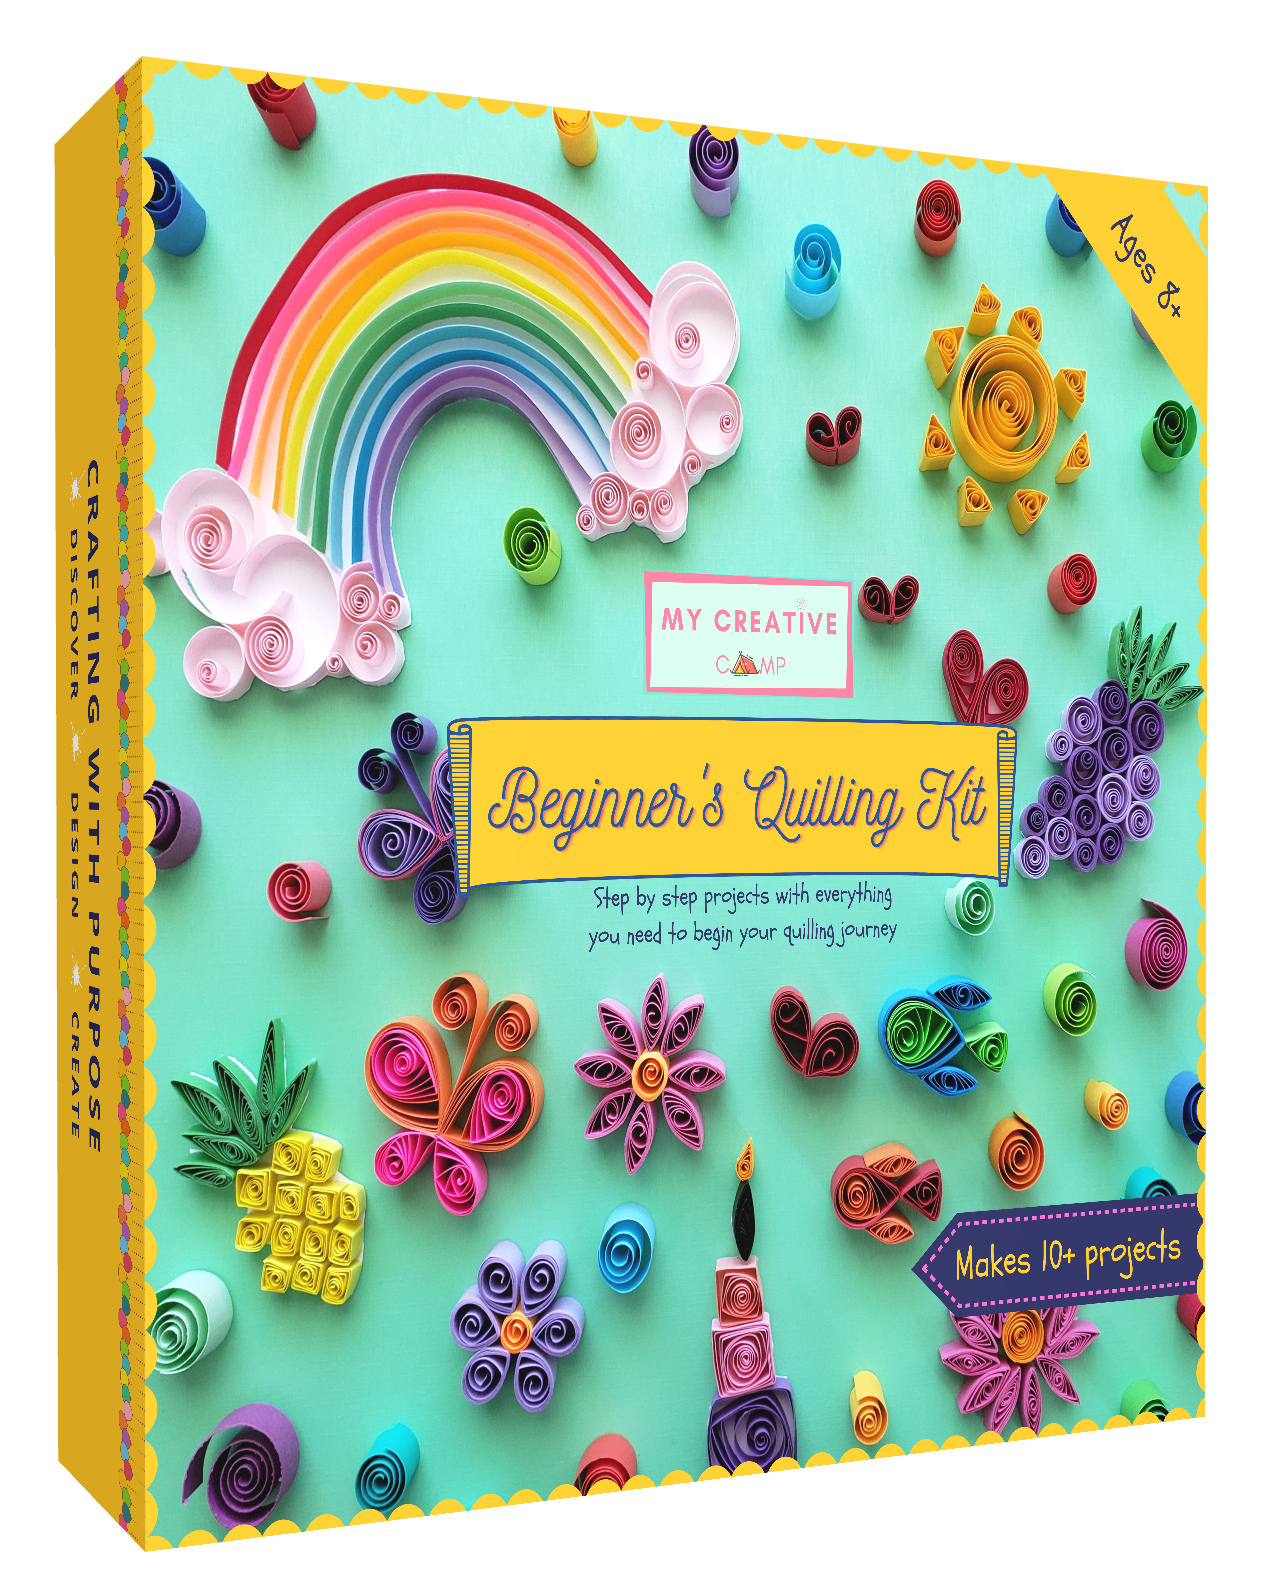 Affordable quilling kits - Bing - Shopping